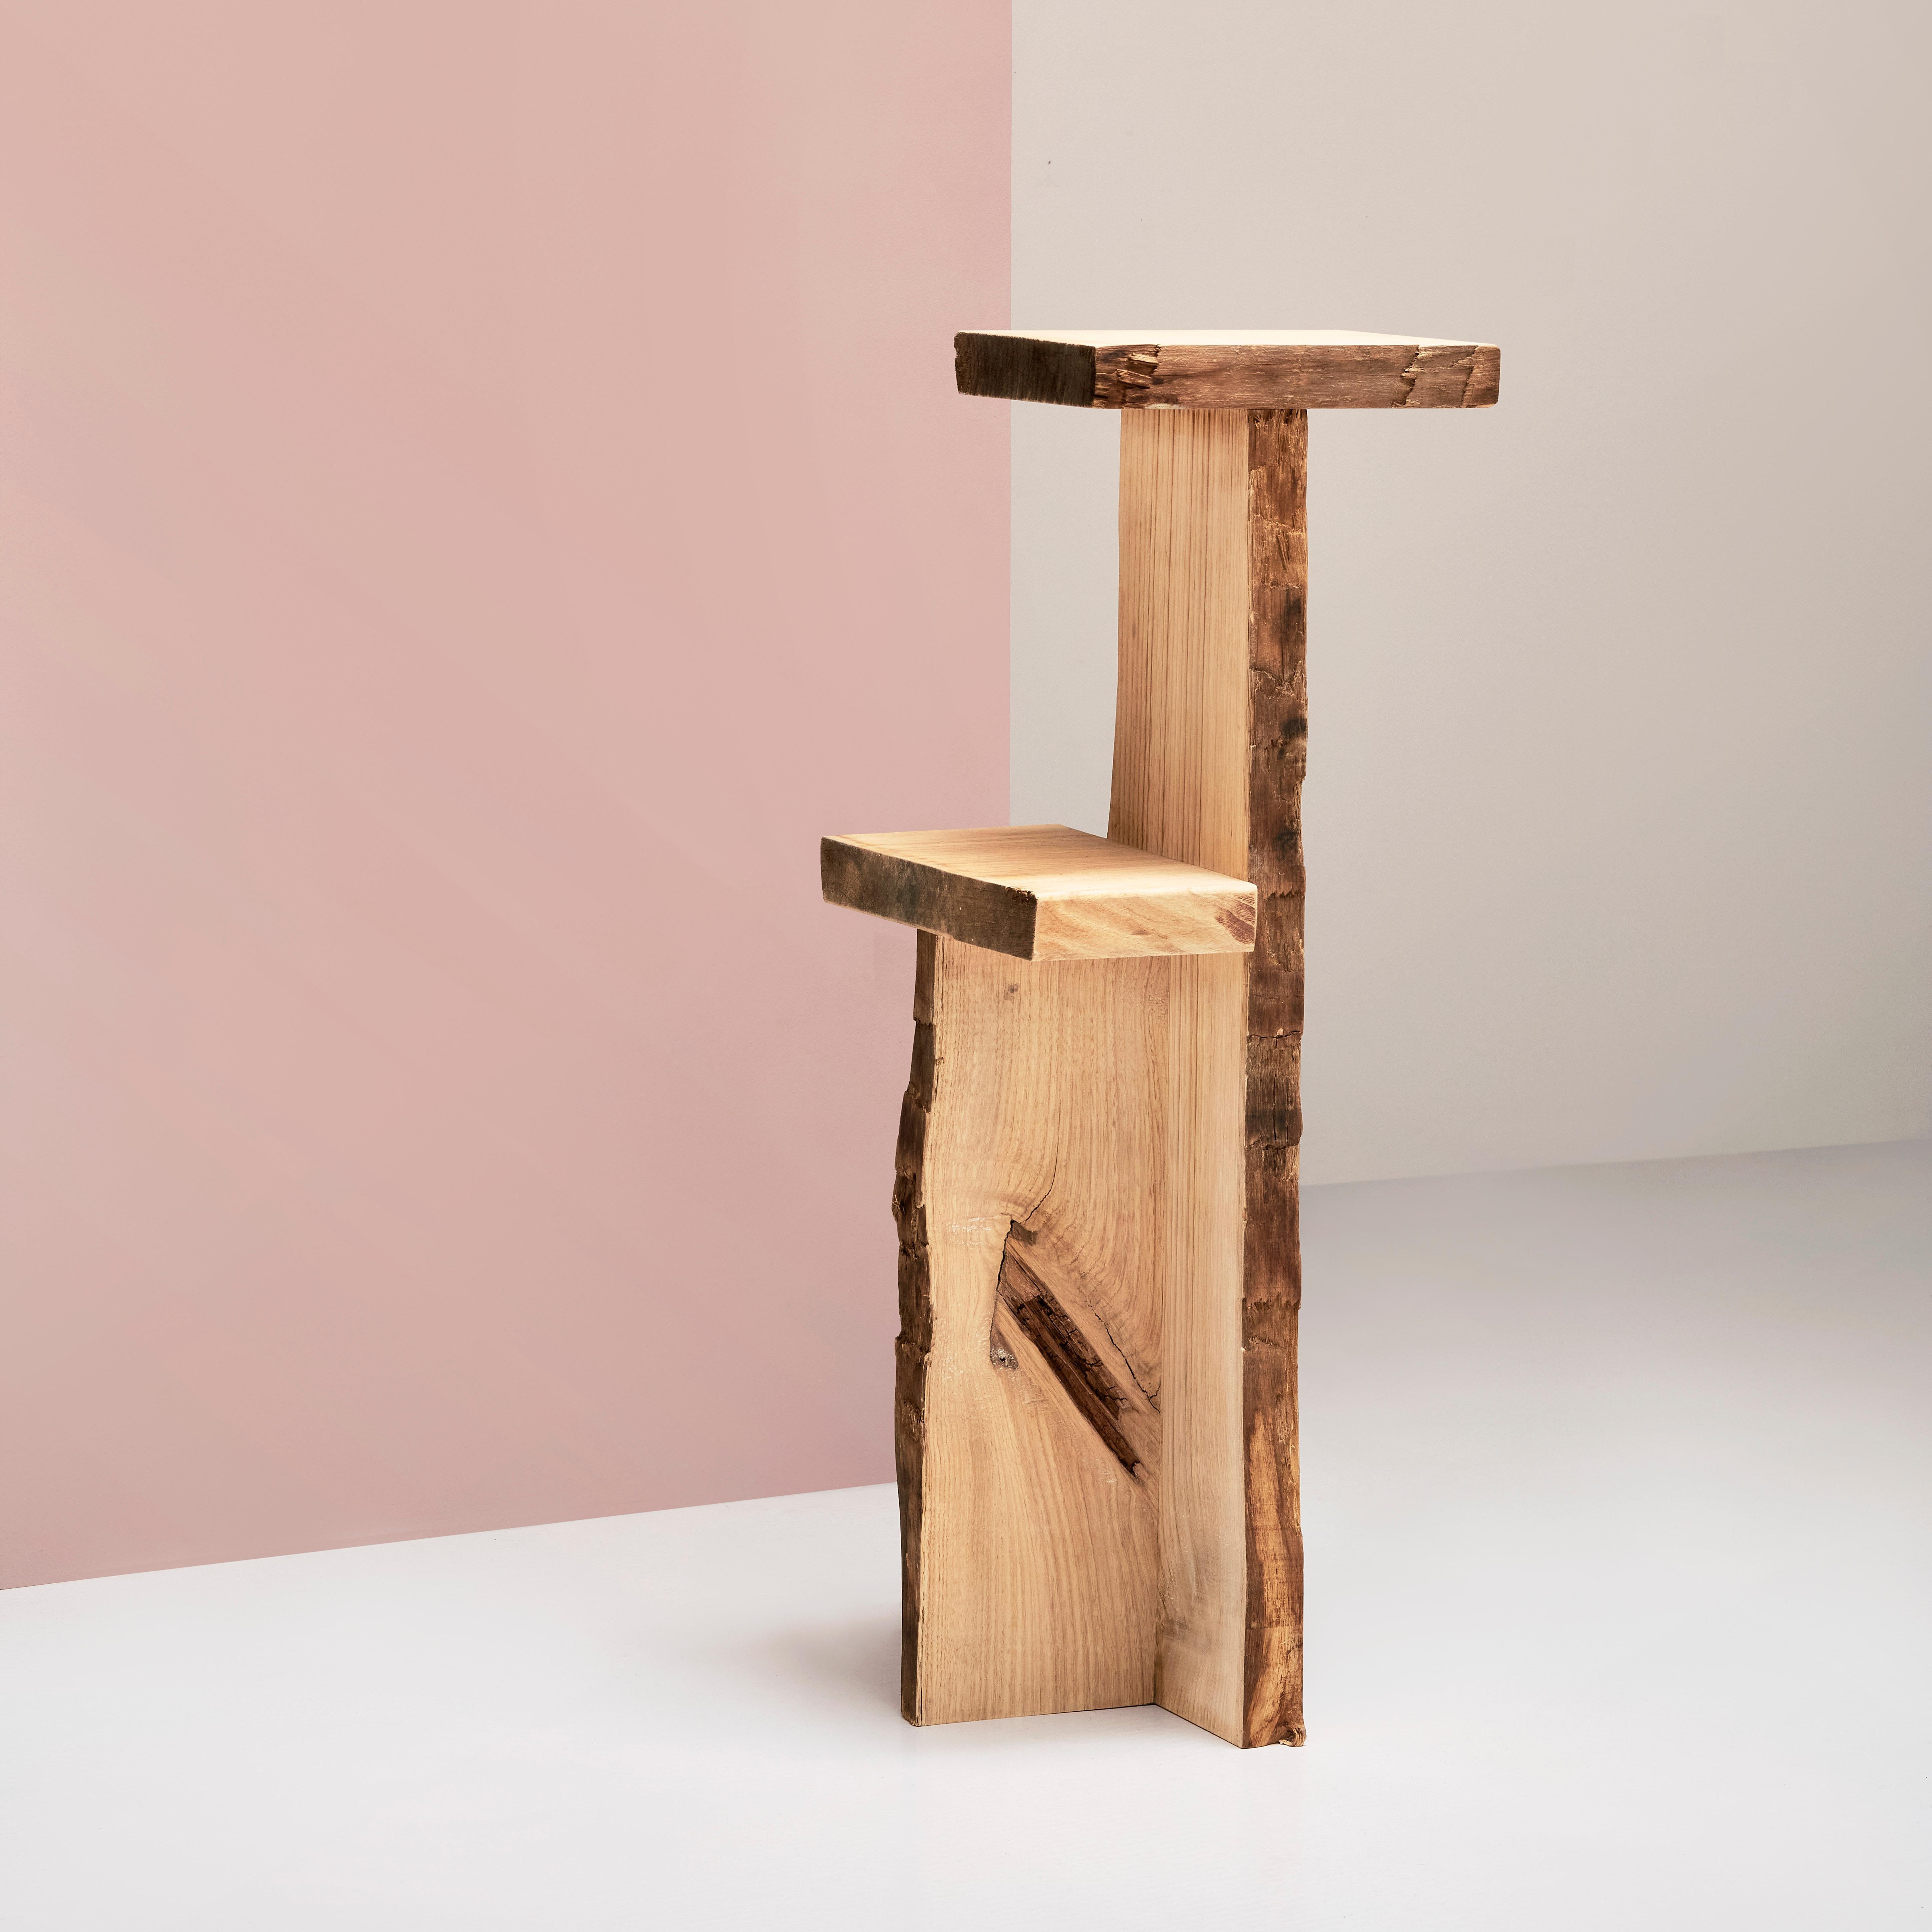 Ripped Wood Double Podium by Willem Van Hooff
Handmade
Dimensions: W 27 x H 91 cm (Dimensions may vary as pieces are hand-made and might present slight variations in sizes)
Materials: Wood.


Willem van Hooff is a designer based in Eindhoven.
He is